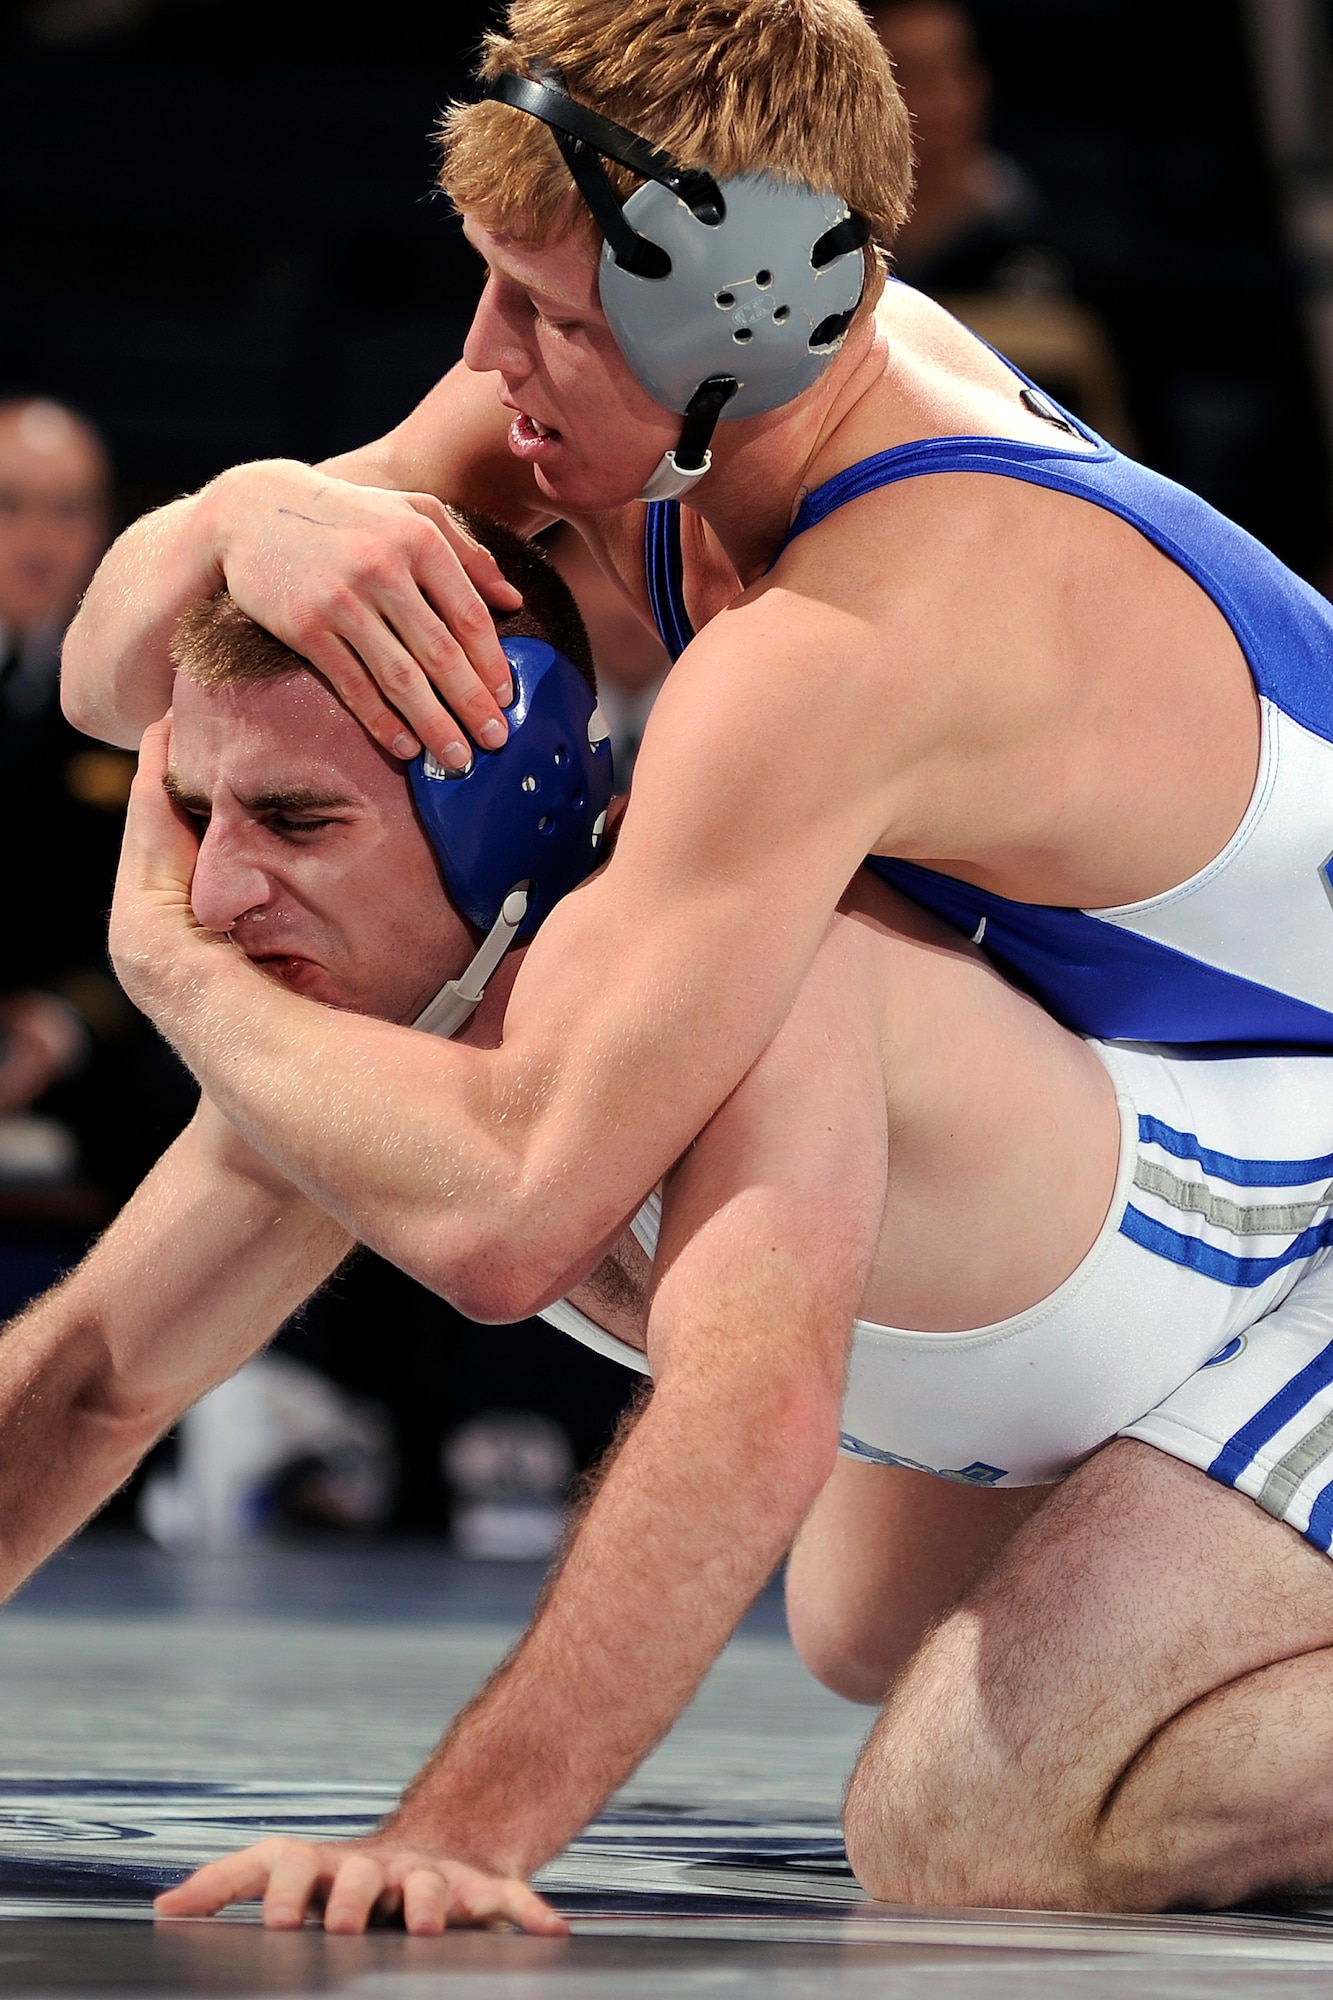 Cole VanOhlen (top) grapples with a wrestler from the U.S. Merchant Marine Academy during the All-Academy Championship Feb. 5, 2012. VanOhlen is one of the country's top wrestlers, with a 21-2 record and 12 falls -- an Air Force school record -- in the 2012-2013 season so far. (U.S. Air Force photo/Mike Kaplan)